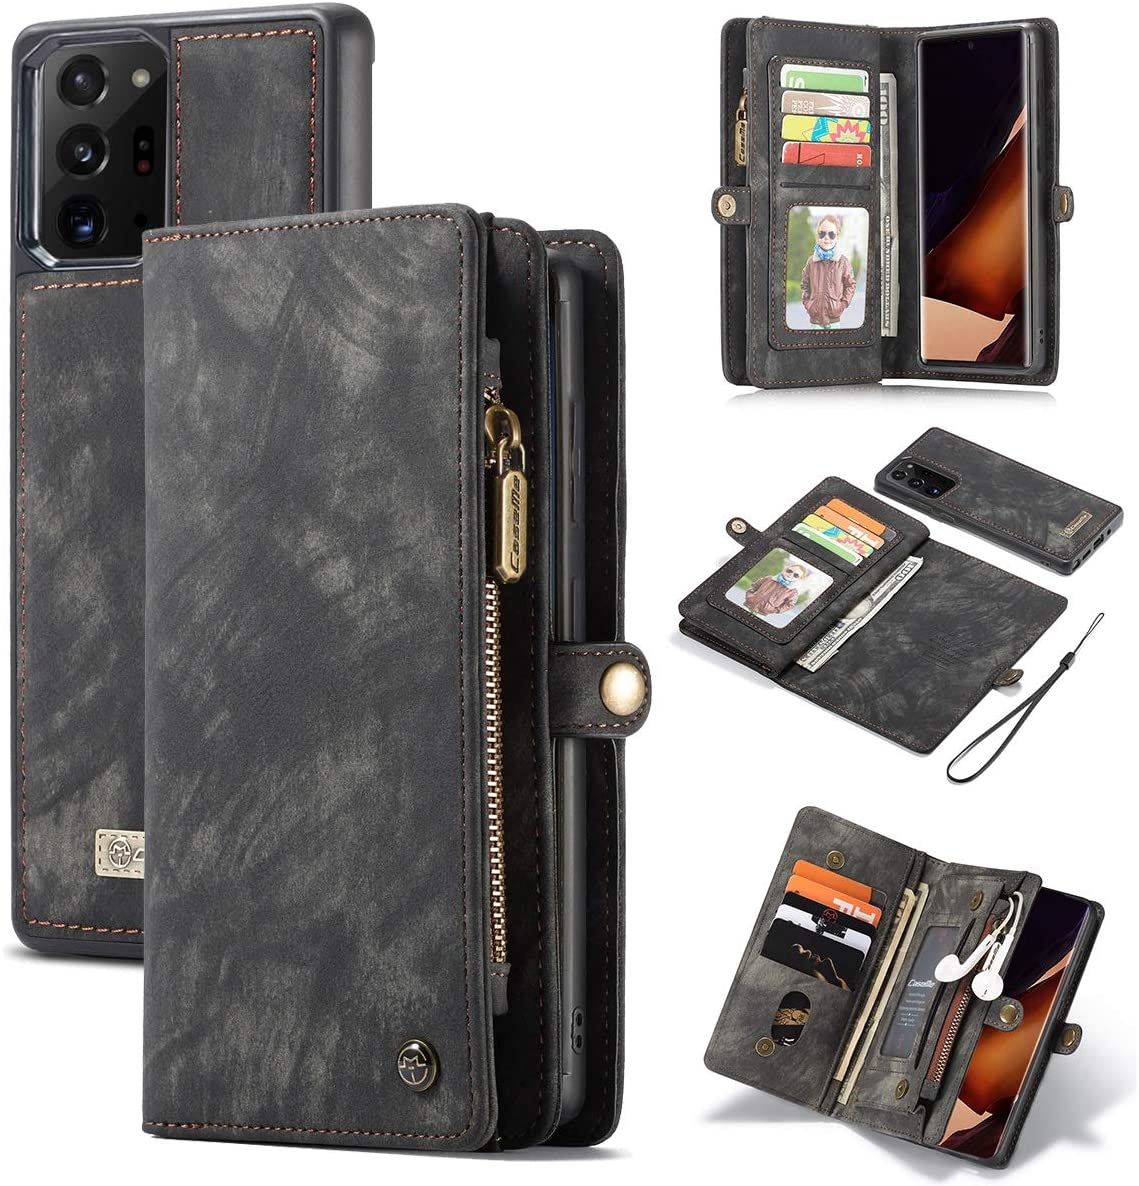 Samsung Galaxy Note 20 Ultra black color leather wallet flip cover case By excelsior